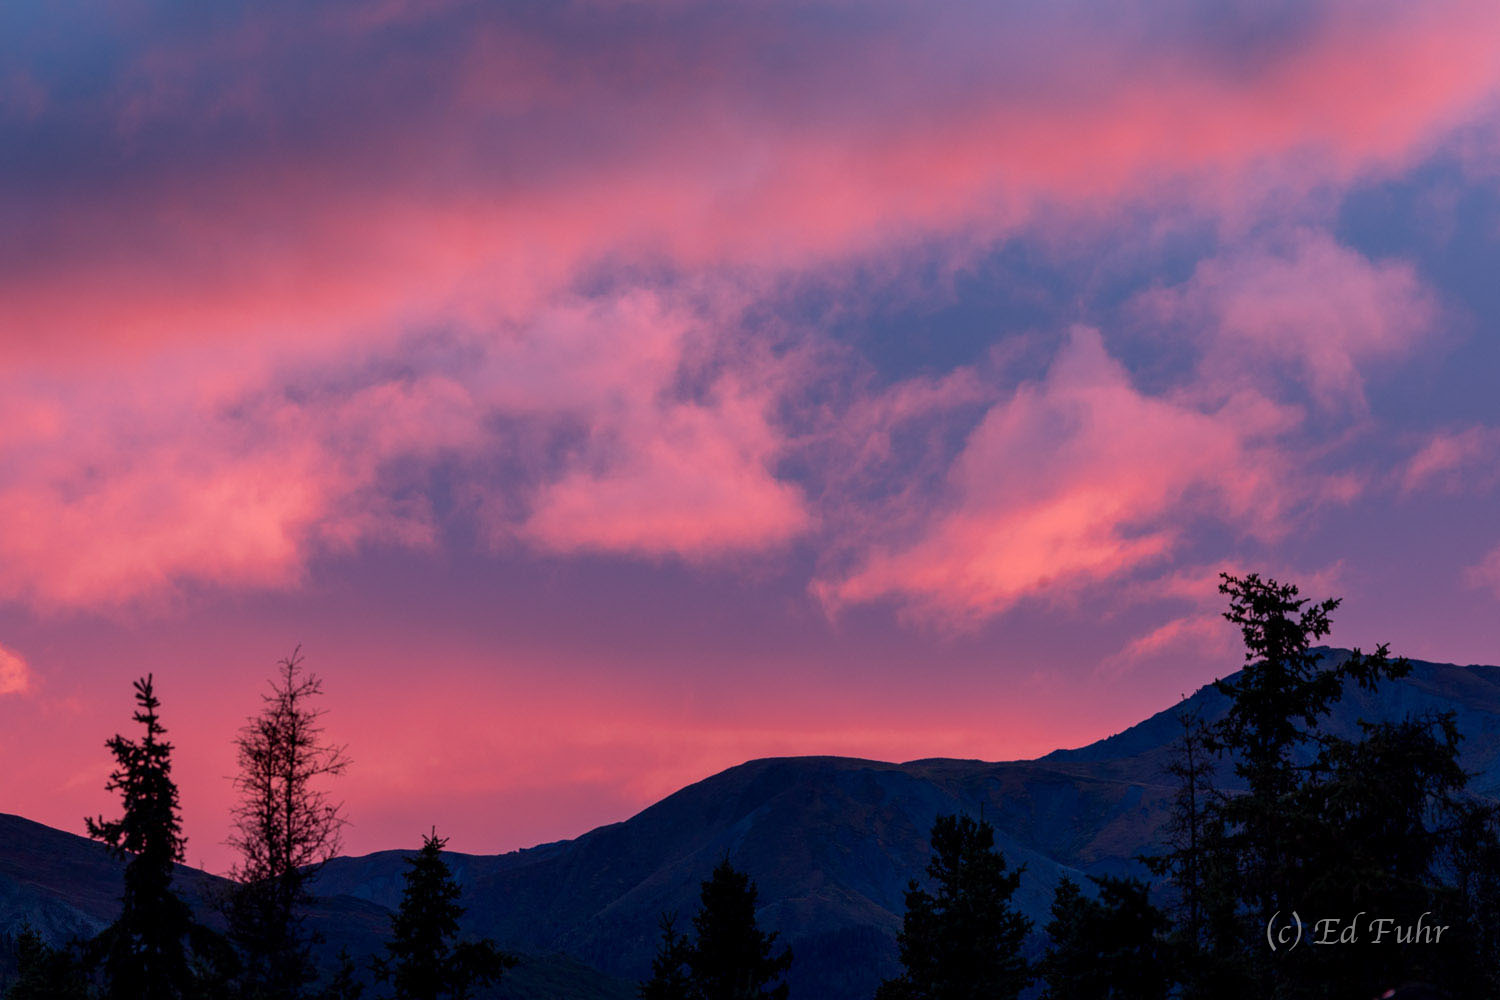 The sky turns all shades of pink and magenta as sunset falls over Denali National Park.